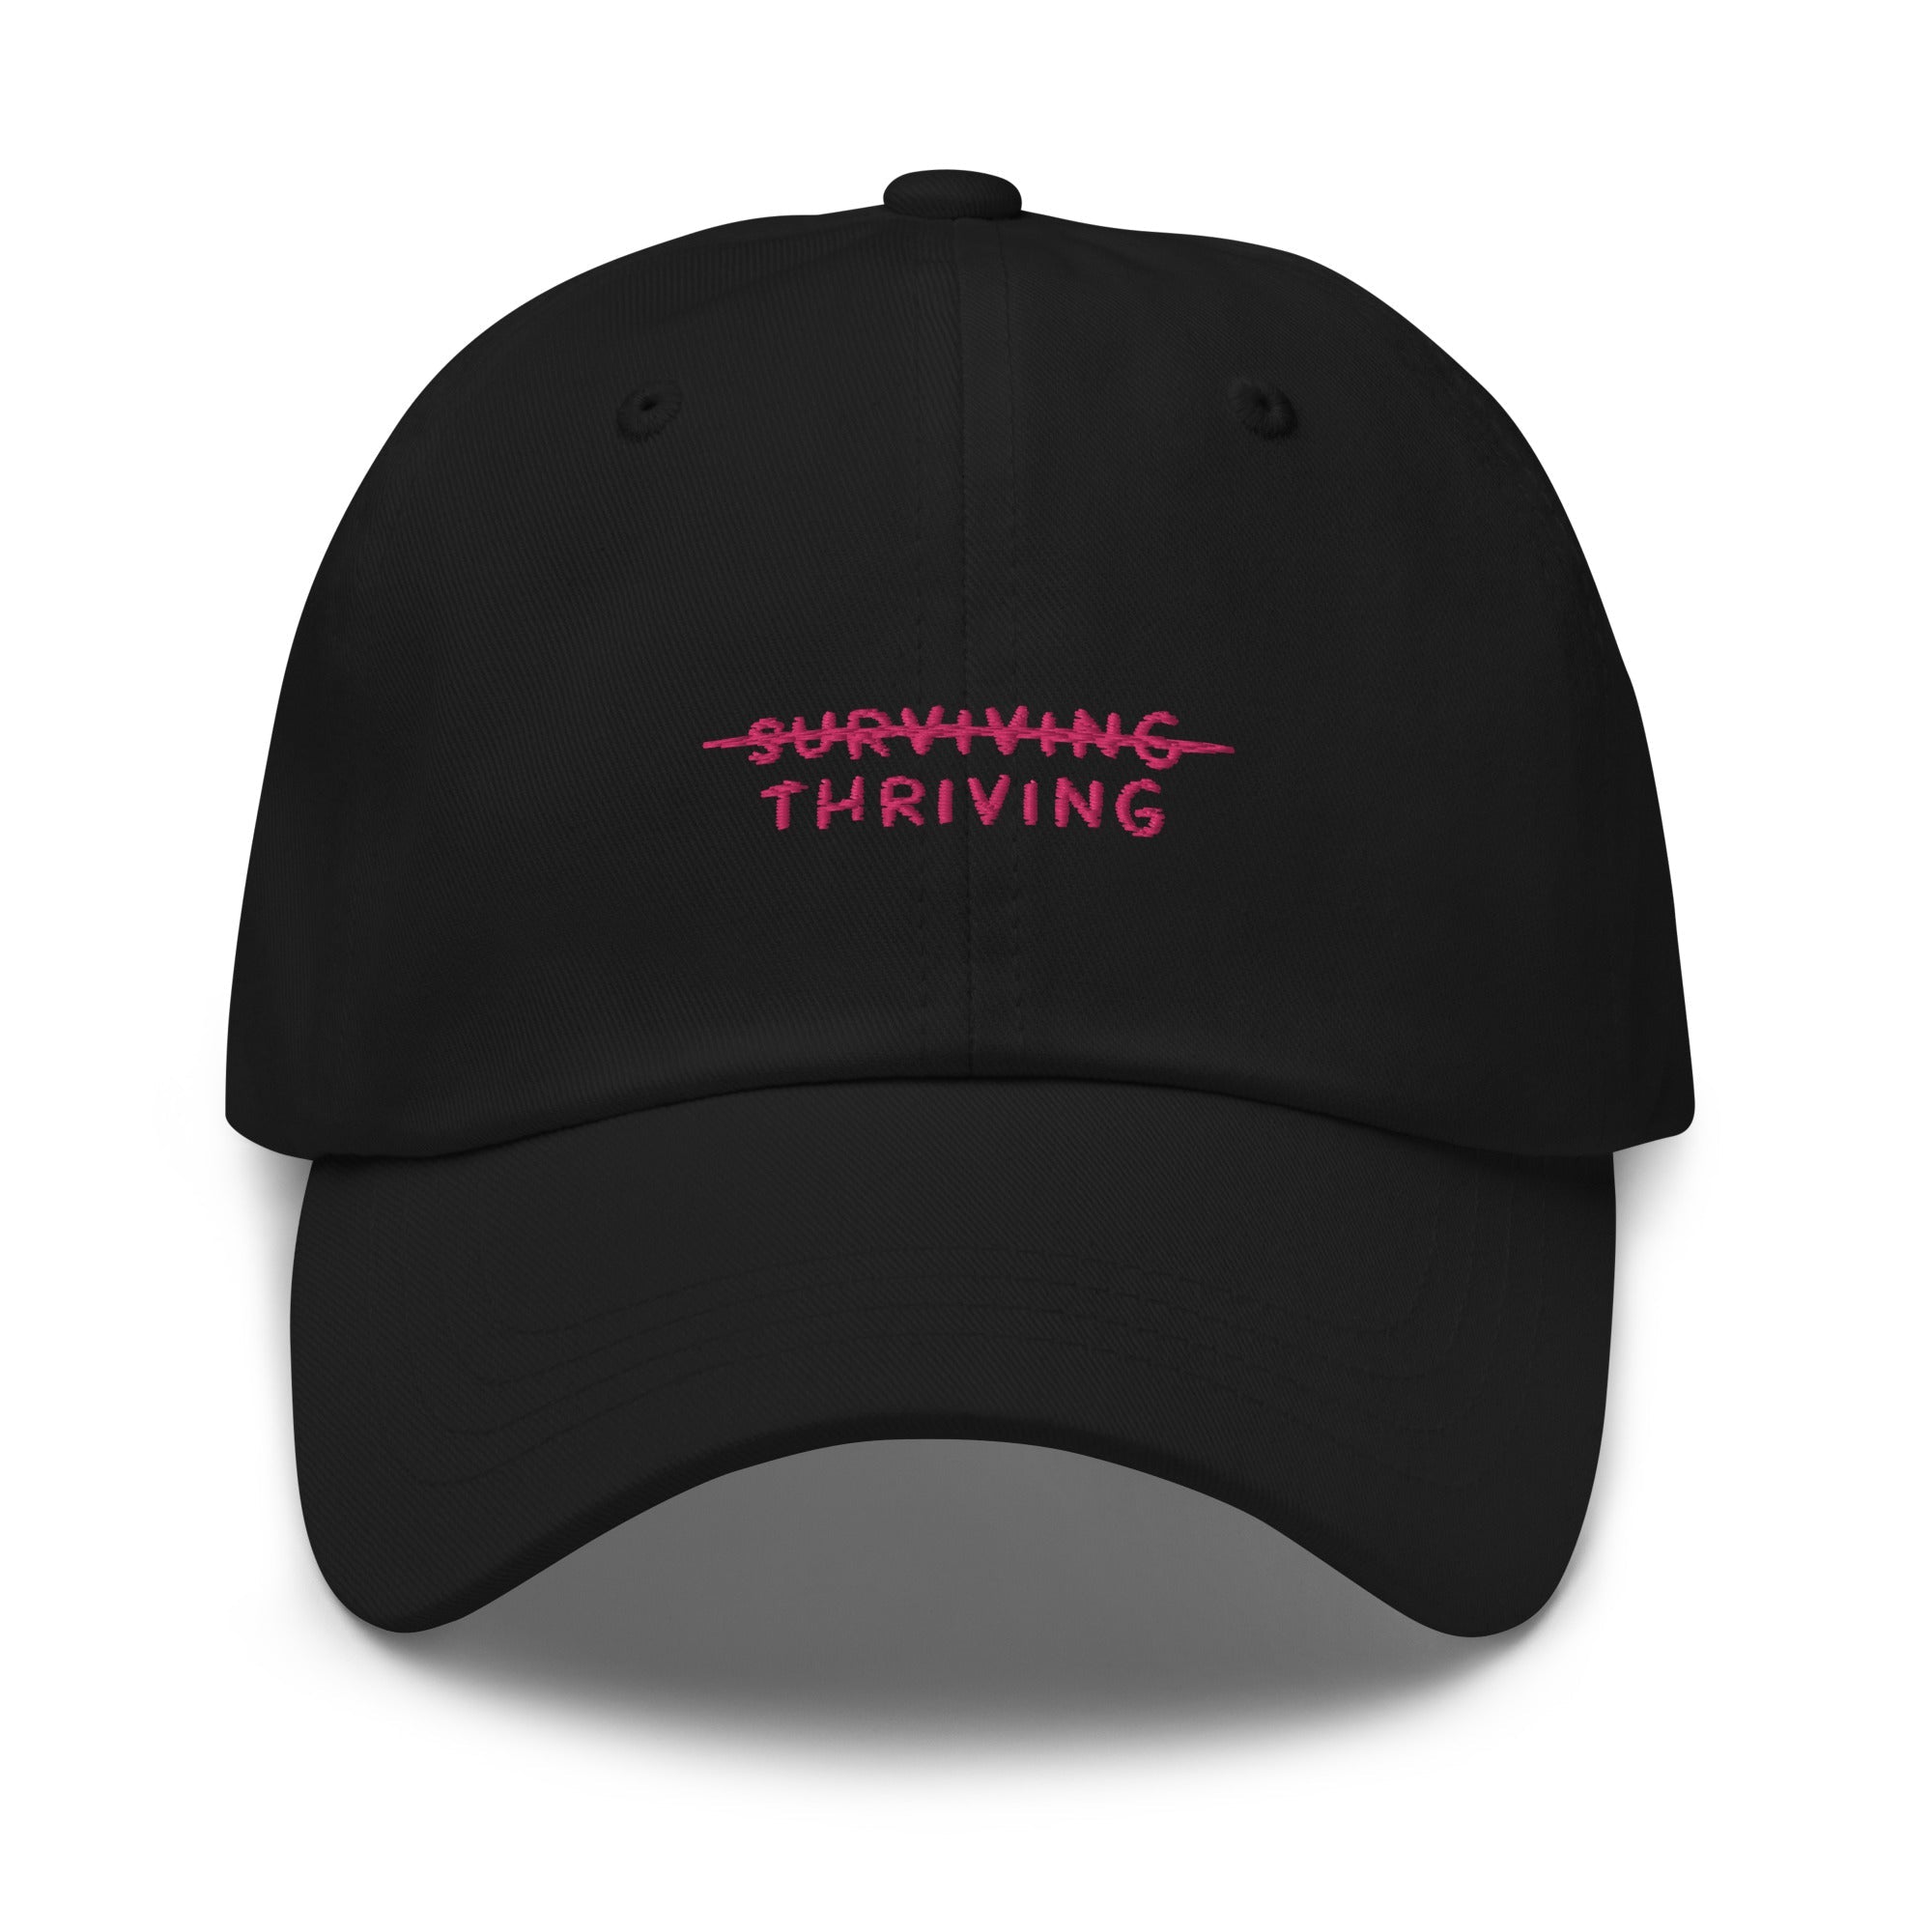 Thriving Not Surviving Breast Cancer Awareness Dad Hat - The Kindness Cause